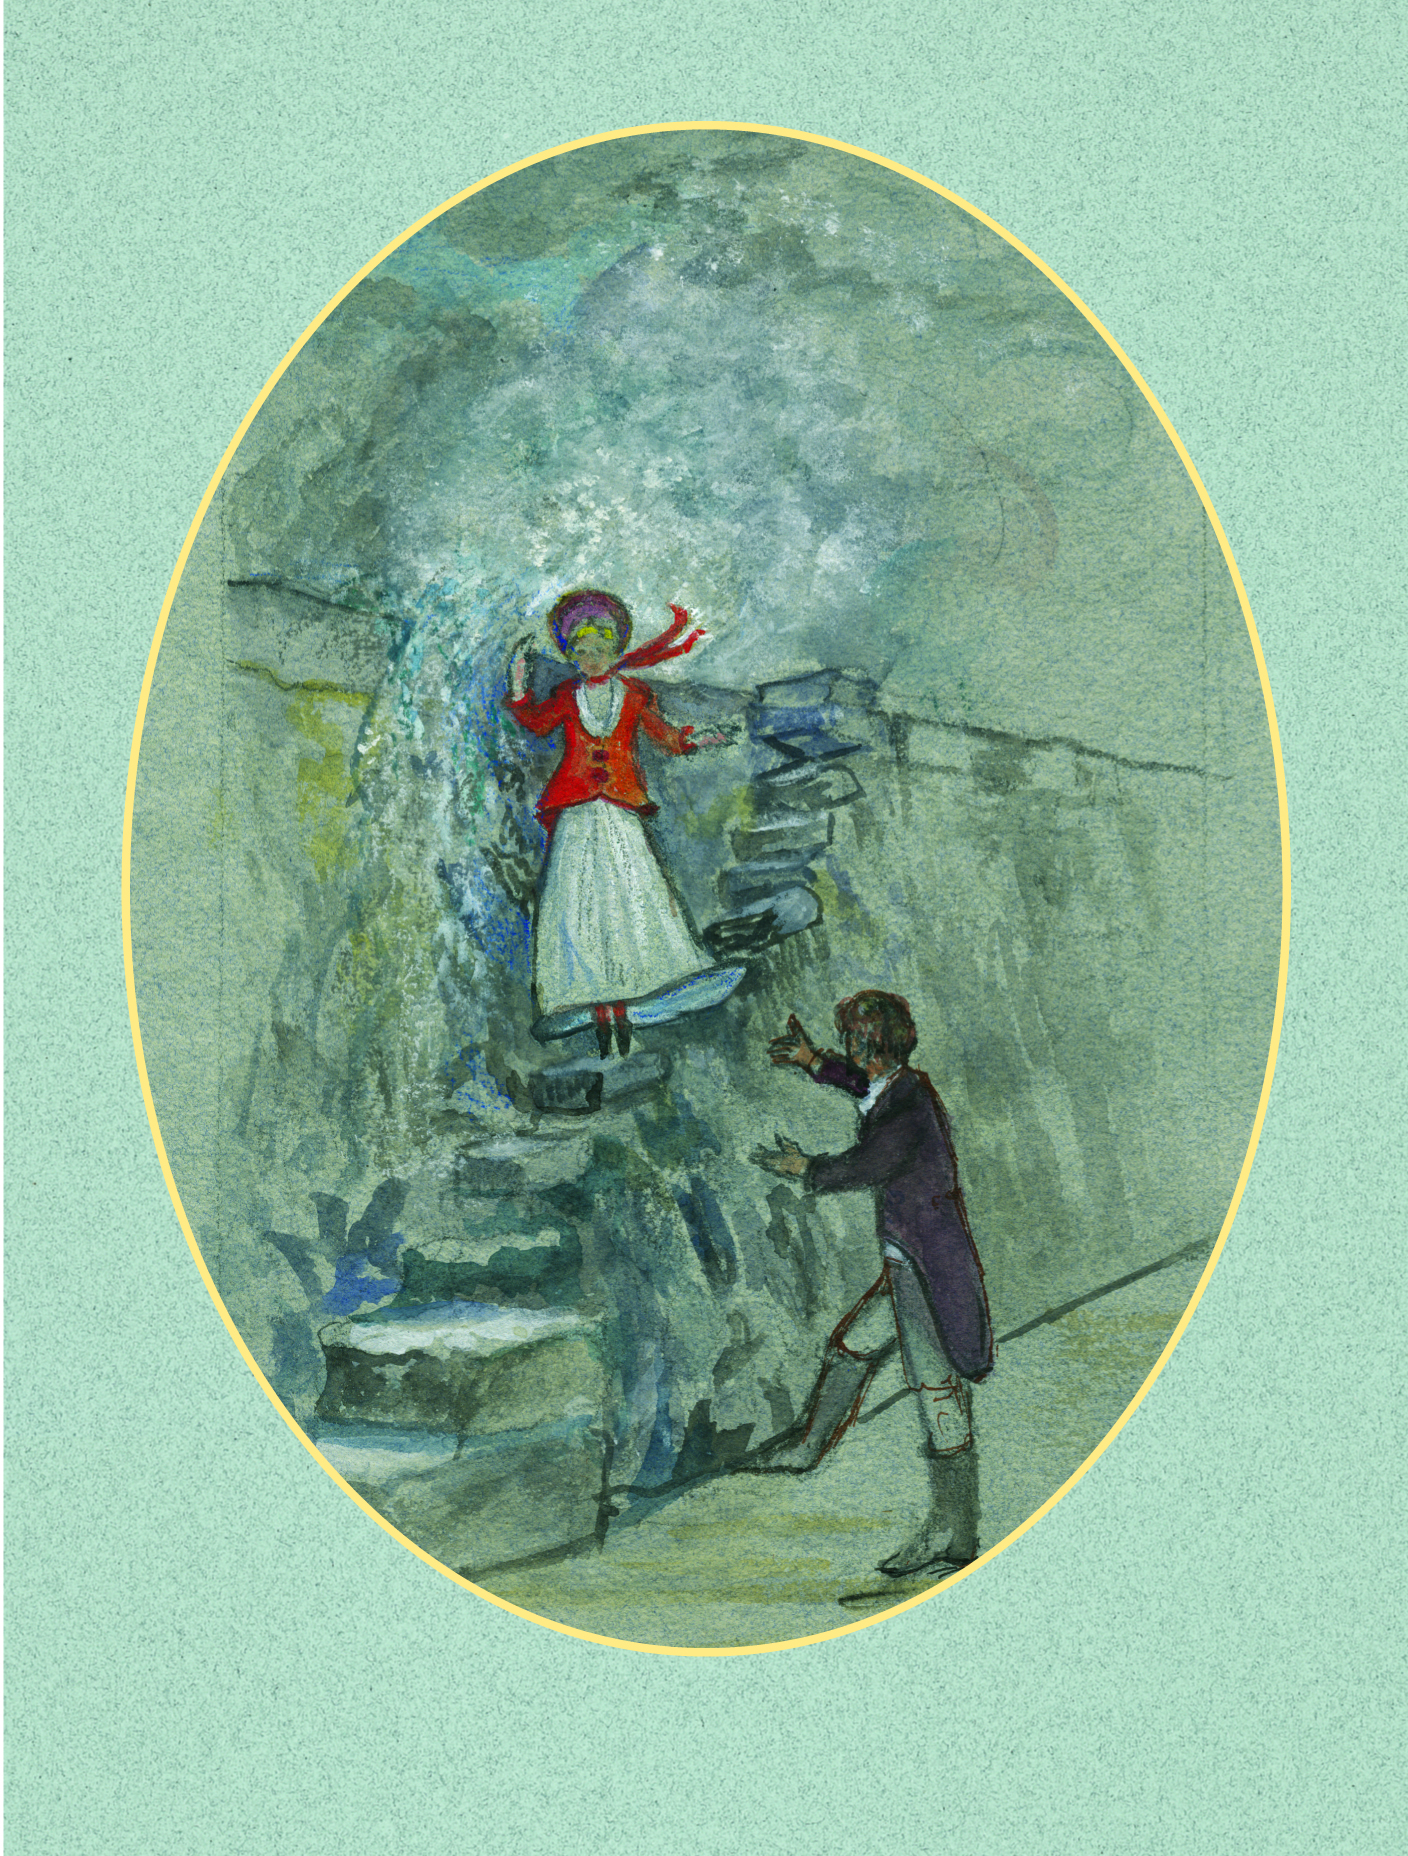 Louisa must be jumped down by Captain Wentworth  - Jane Austen card on sale at Winchester Cathedral gift shop.